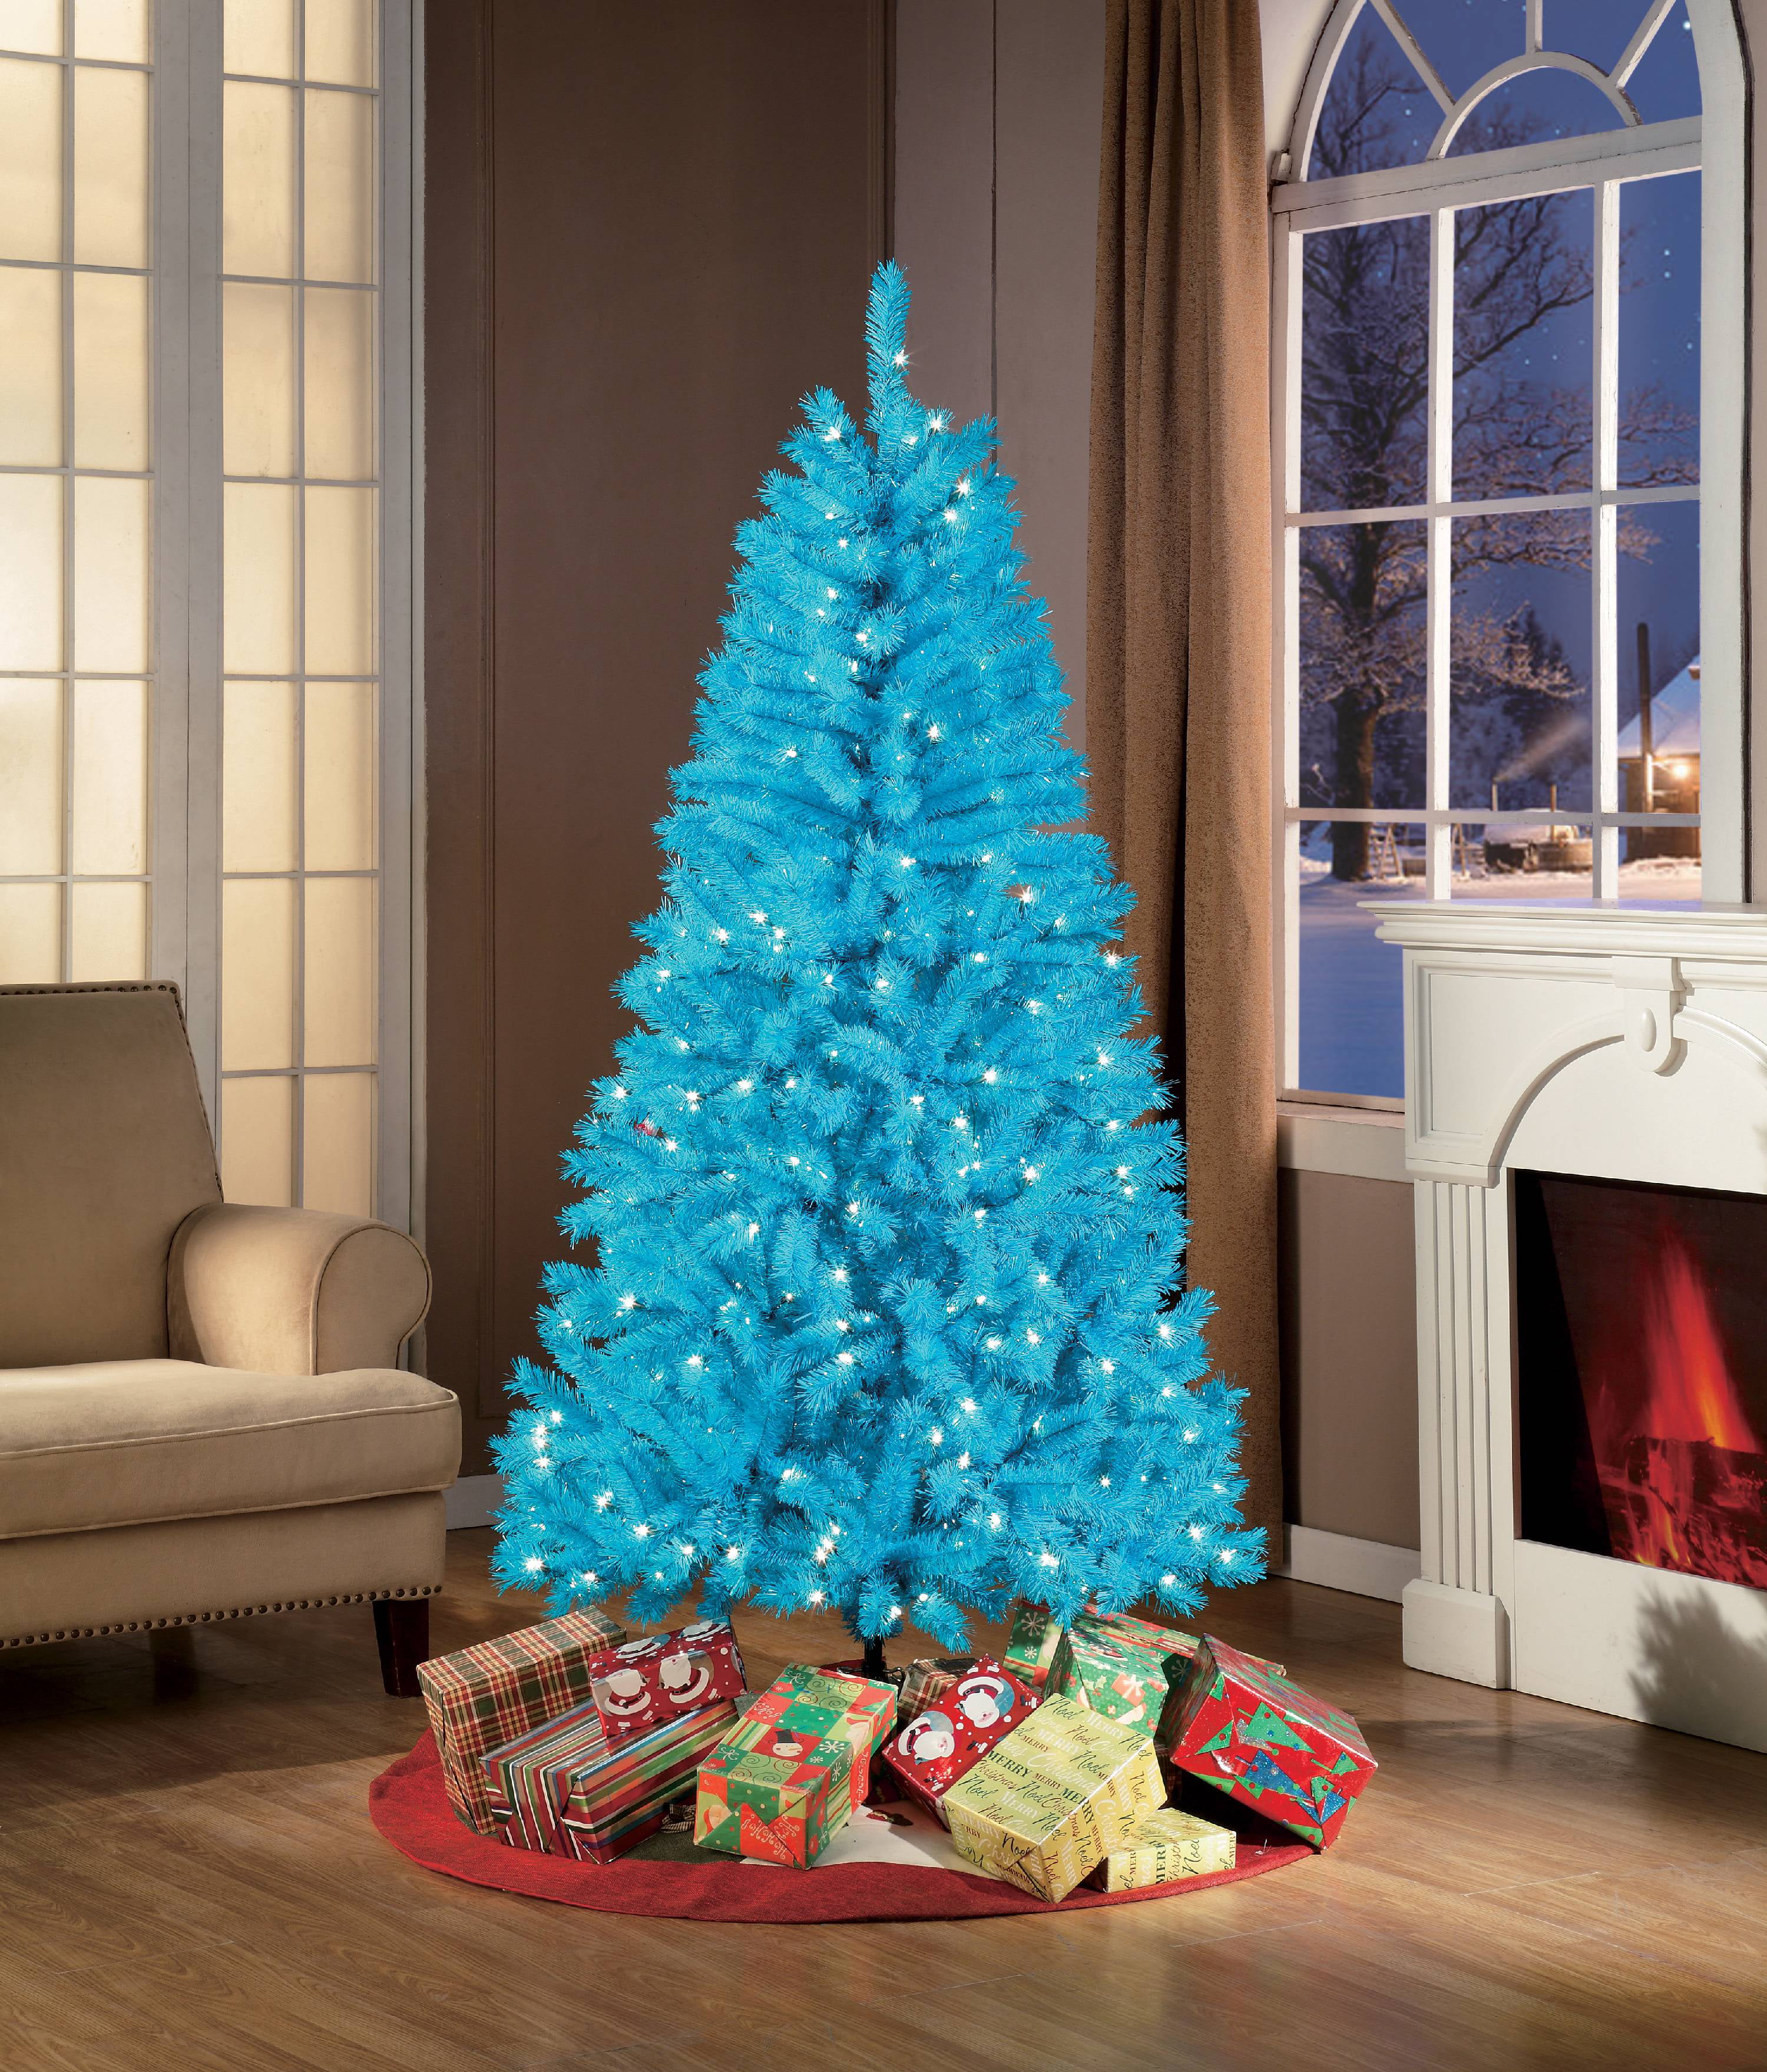 6 Teal Blue Christmas Tree Unique Limited Edition Pre Lit White Clear Lights